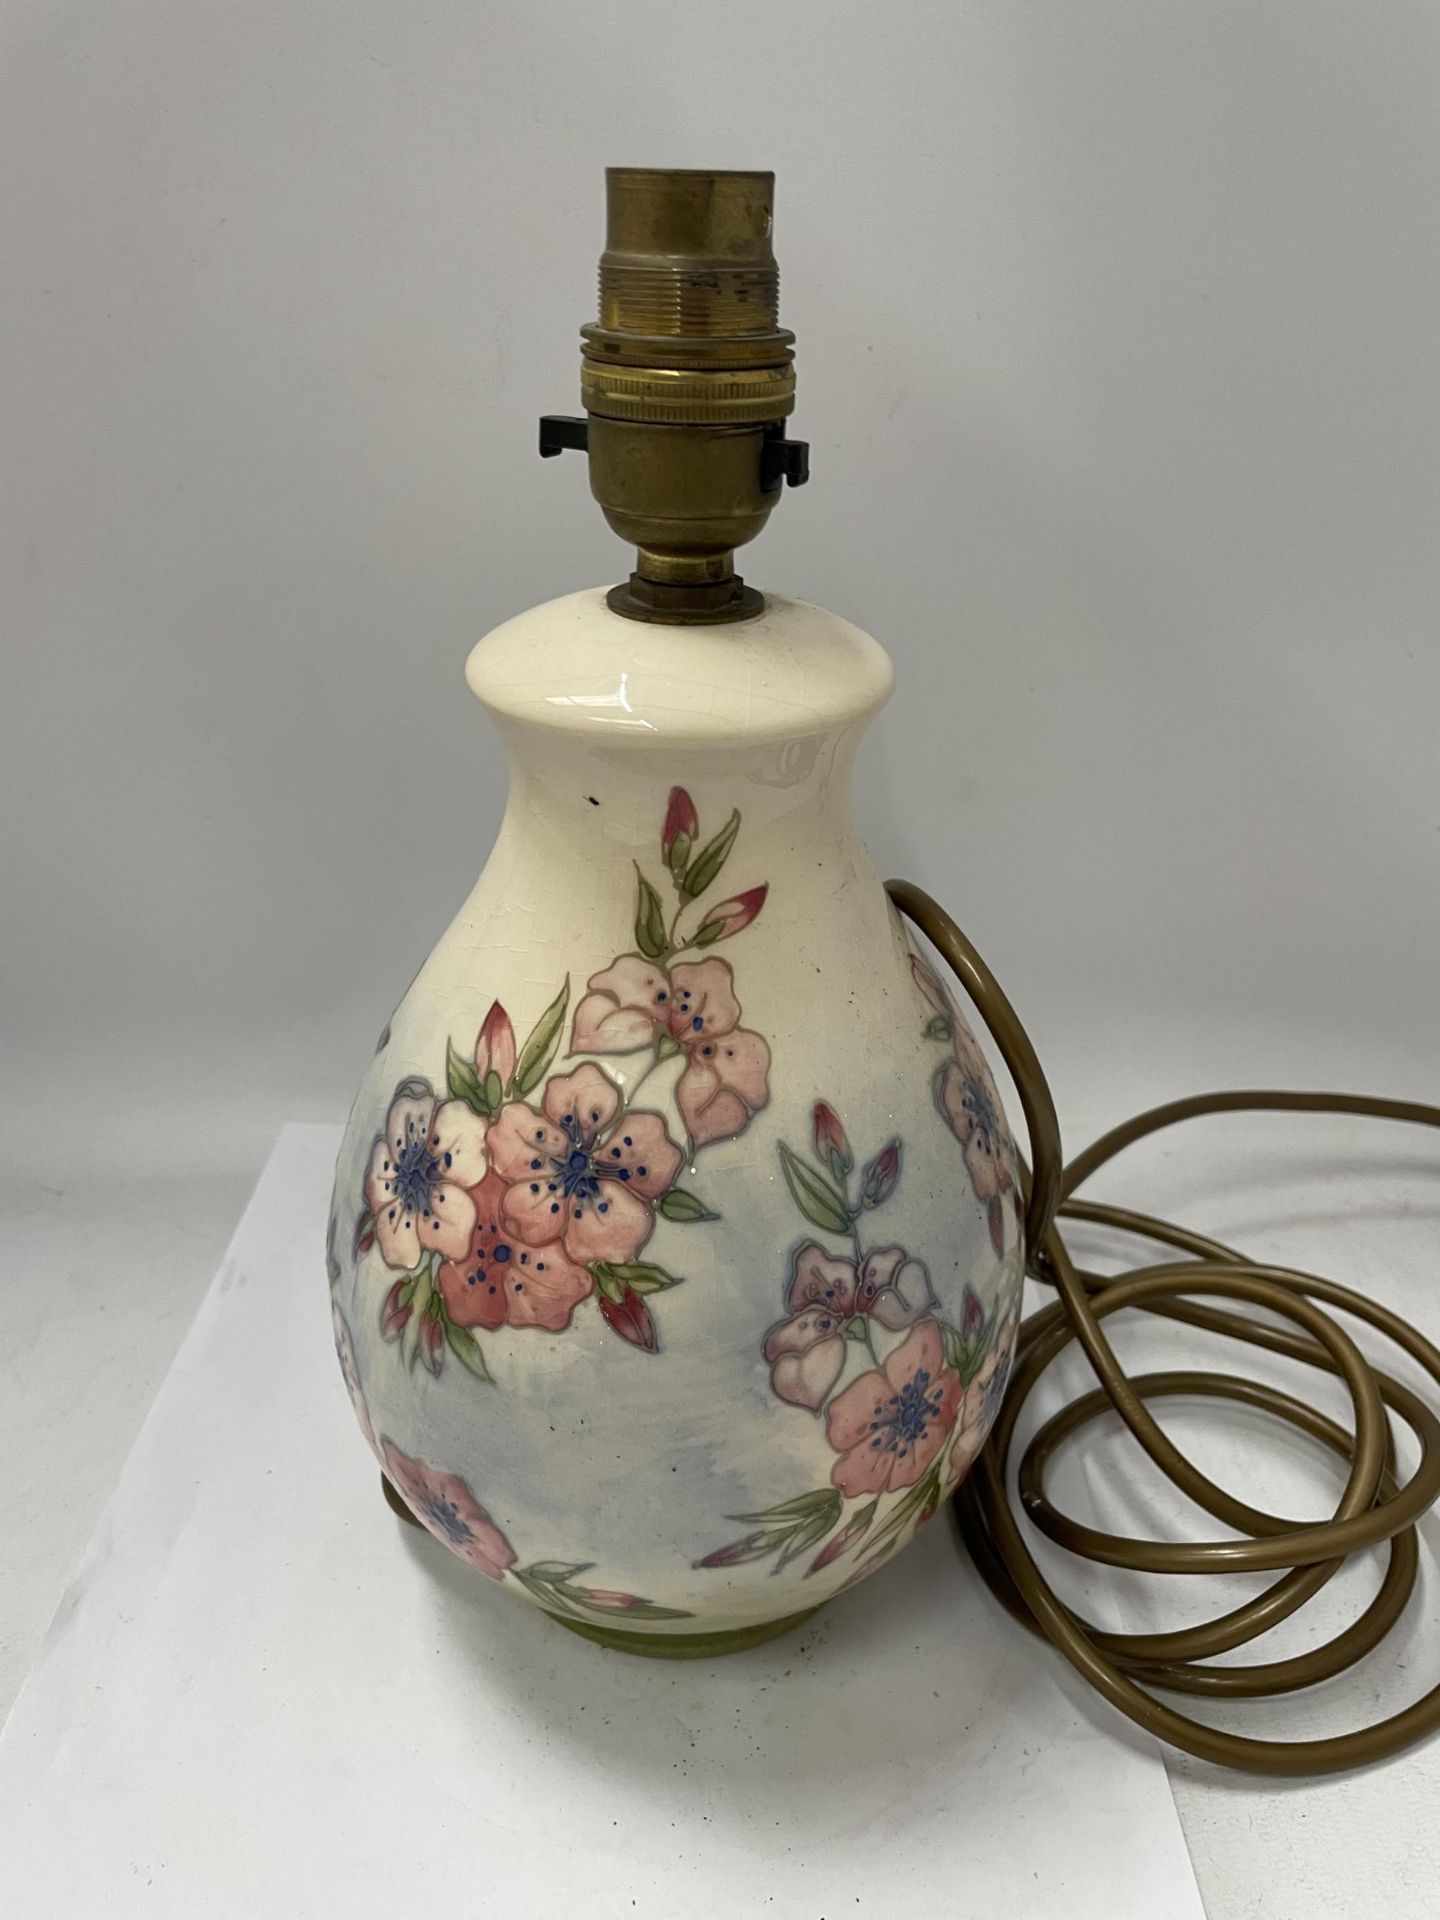 A MOORCROFT POTTERY LAMP DECORATED IN THE 'SPRING BLOSSOM' PATTERN BY DESIGNER SALLY TUFFIN